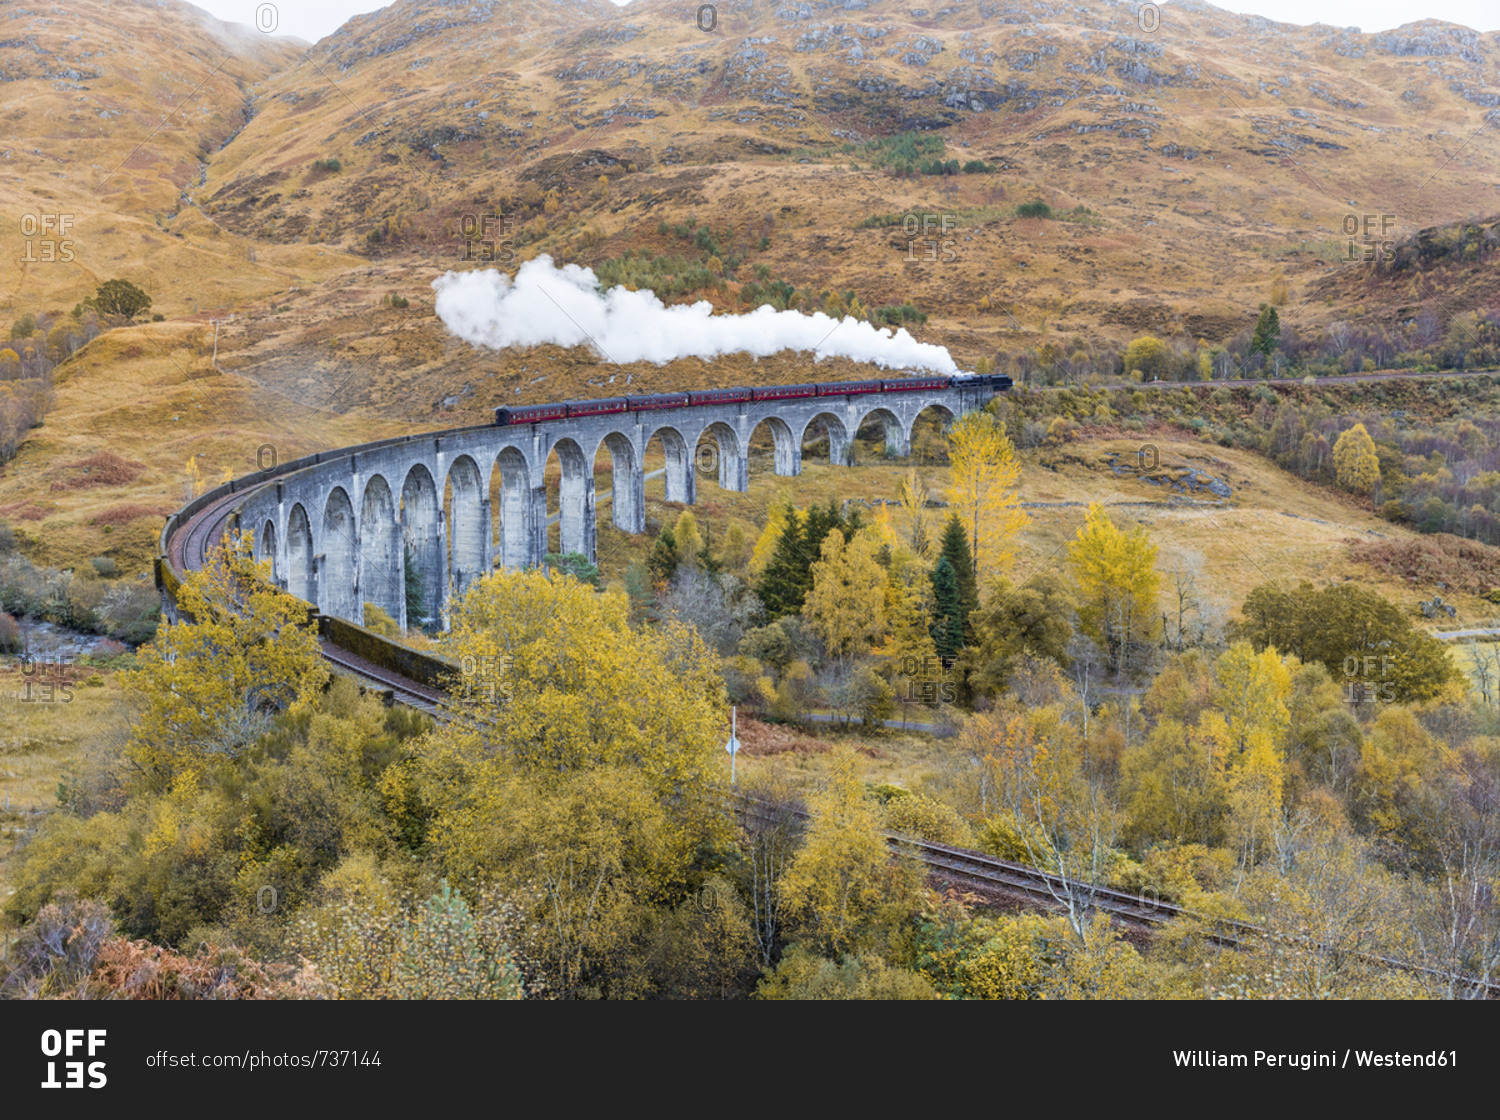 UK- Scotland- Highlands- Glenfinnan viaduct with a steam train passing over it